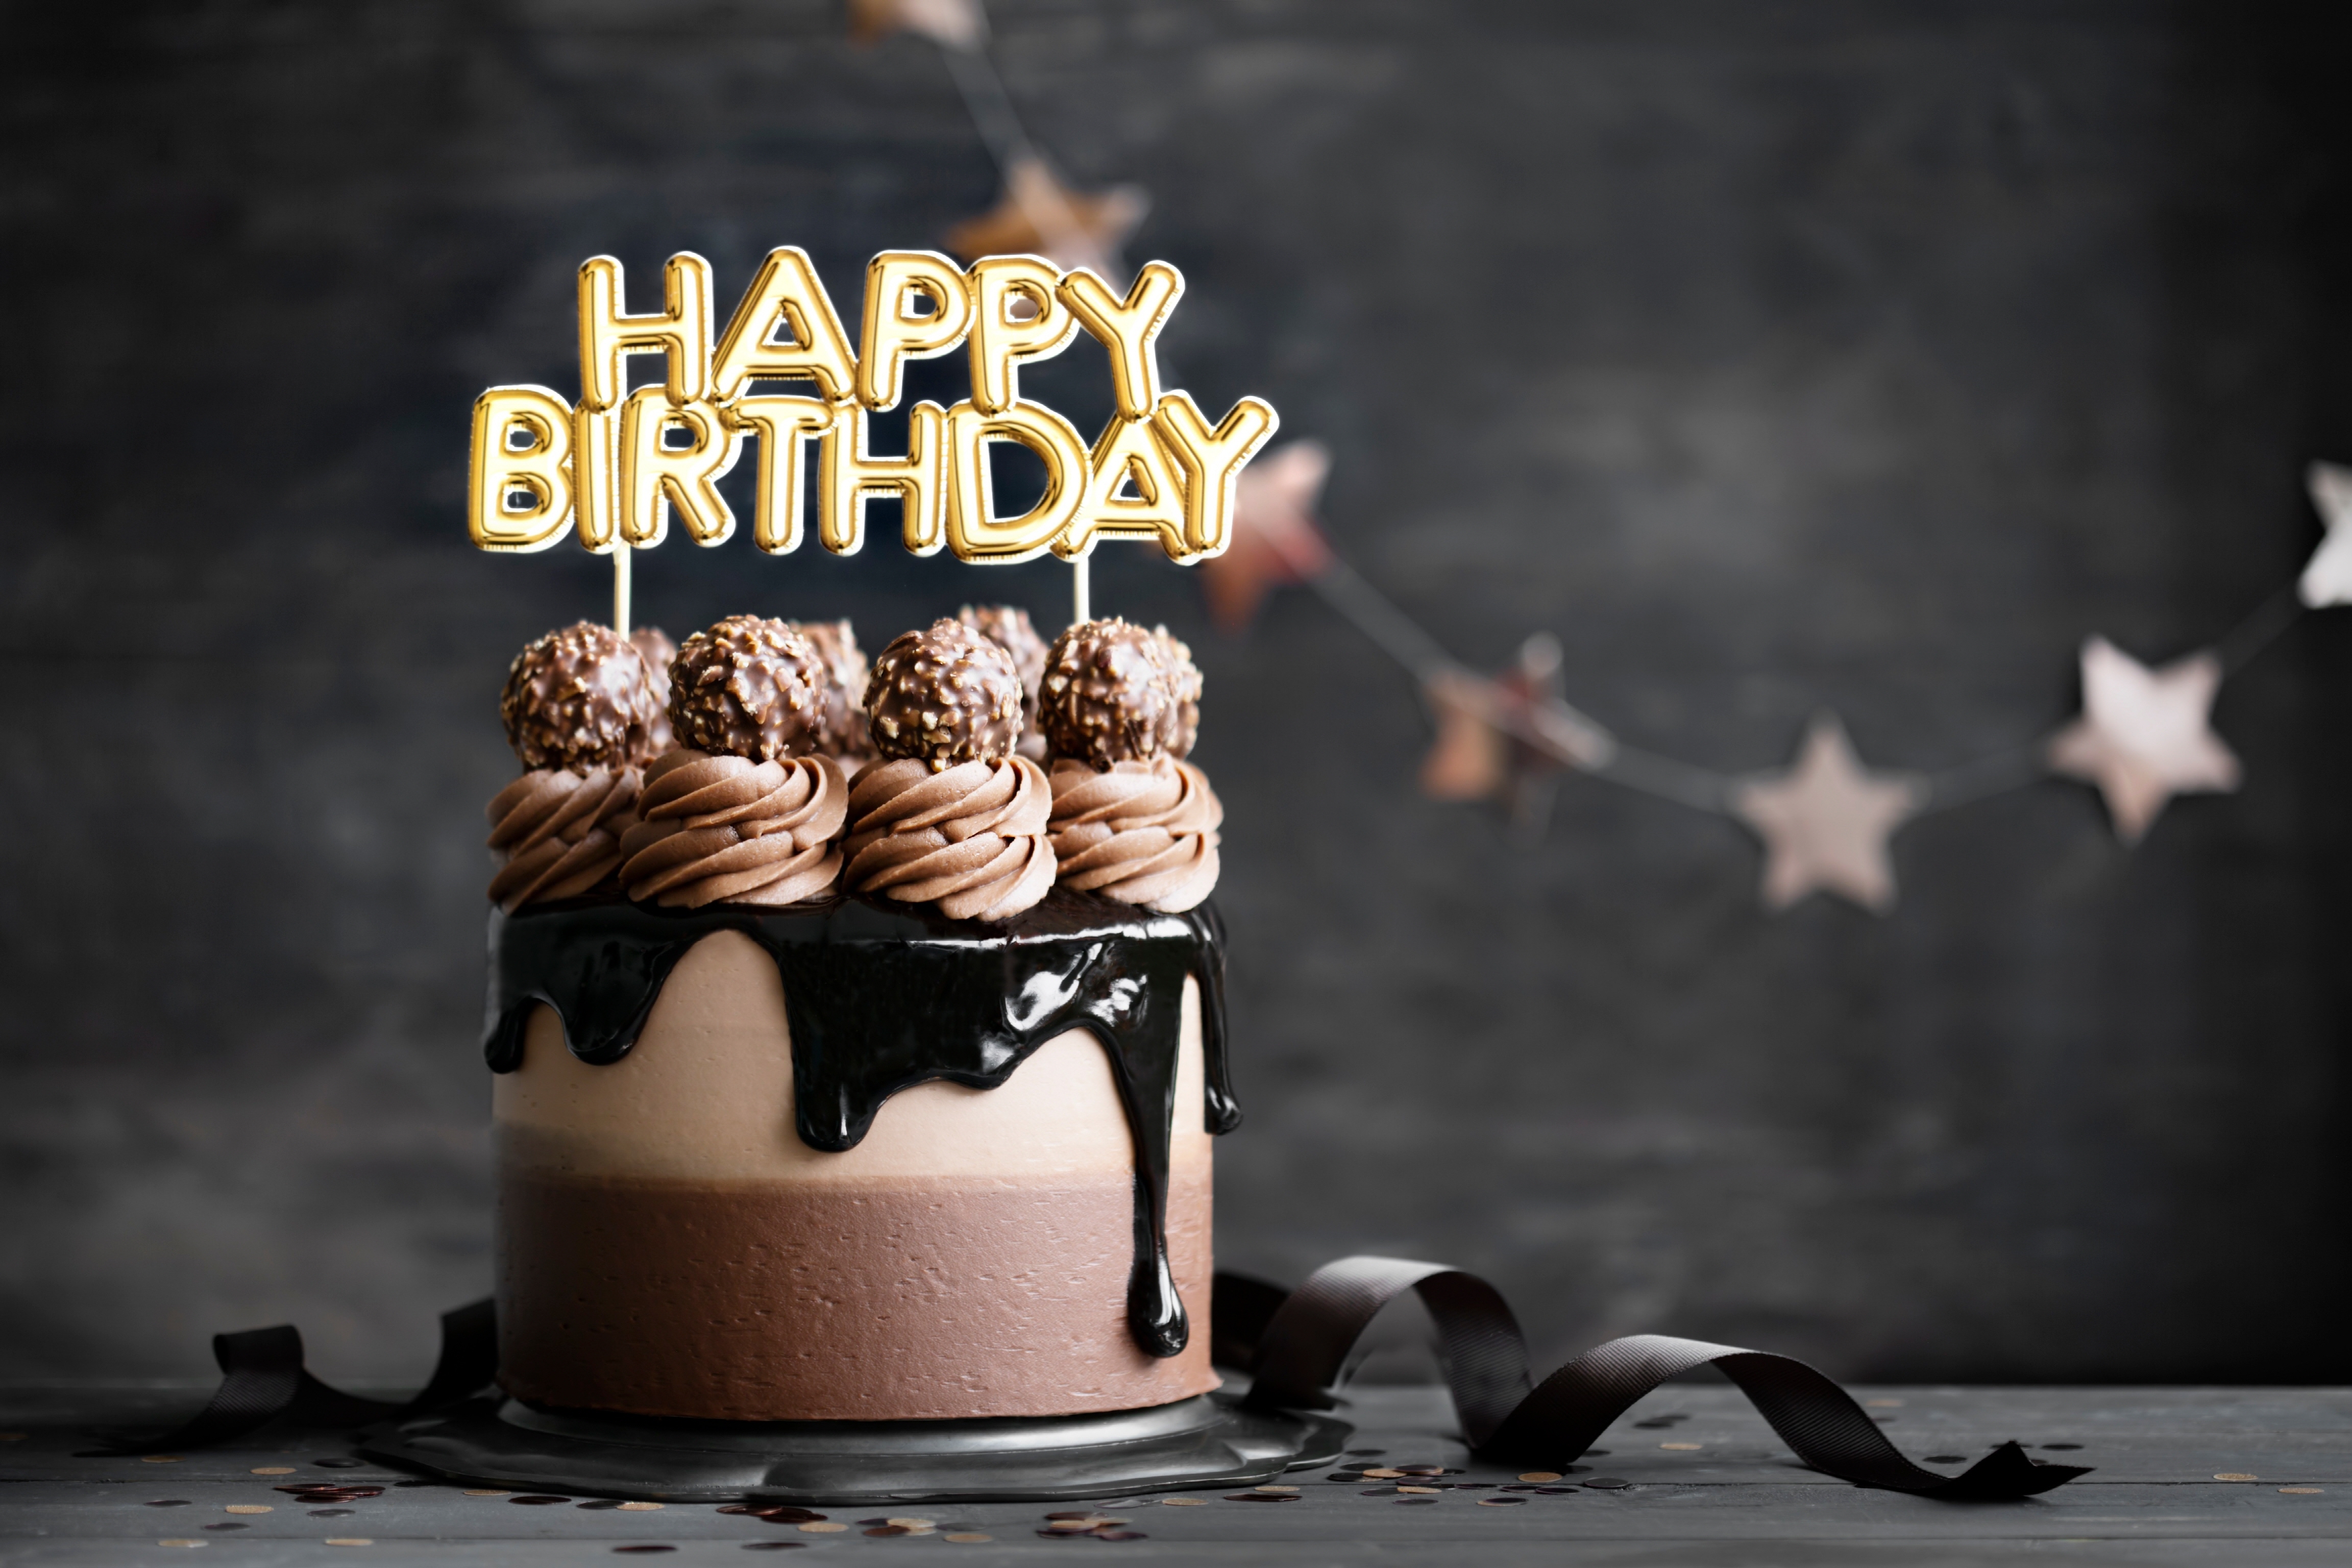 General 4608x3072 cake birthday celebrations happy candles chocolate sweets depth of field stars blurry background